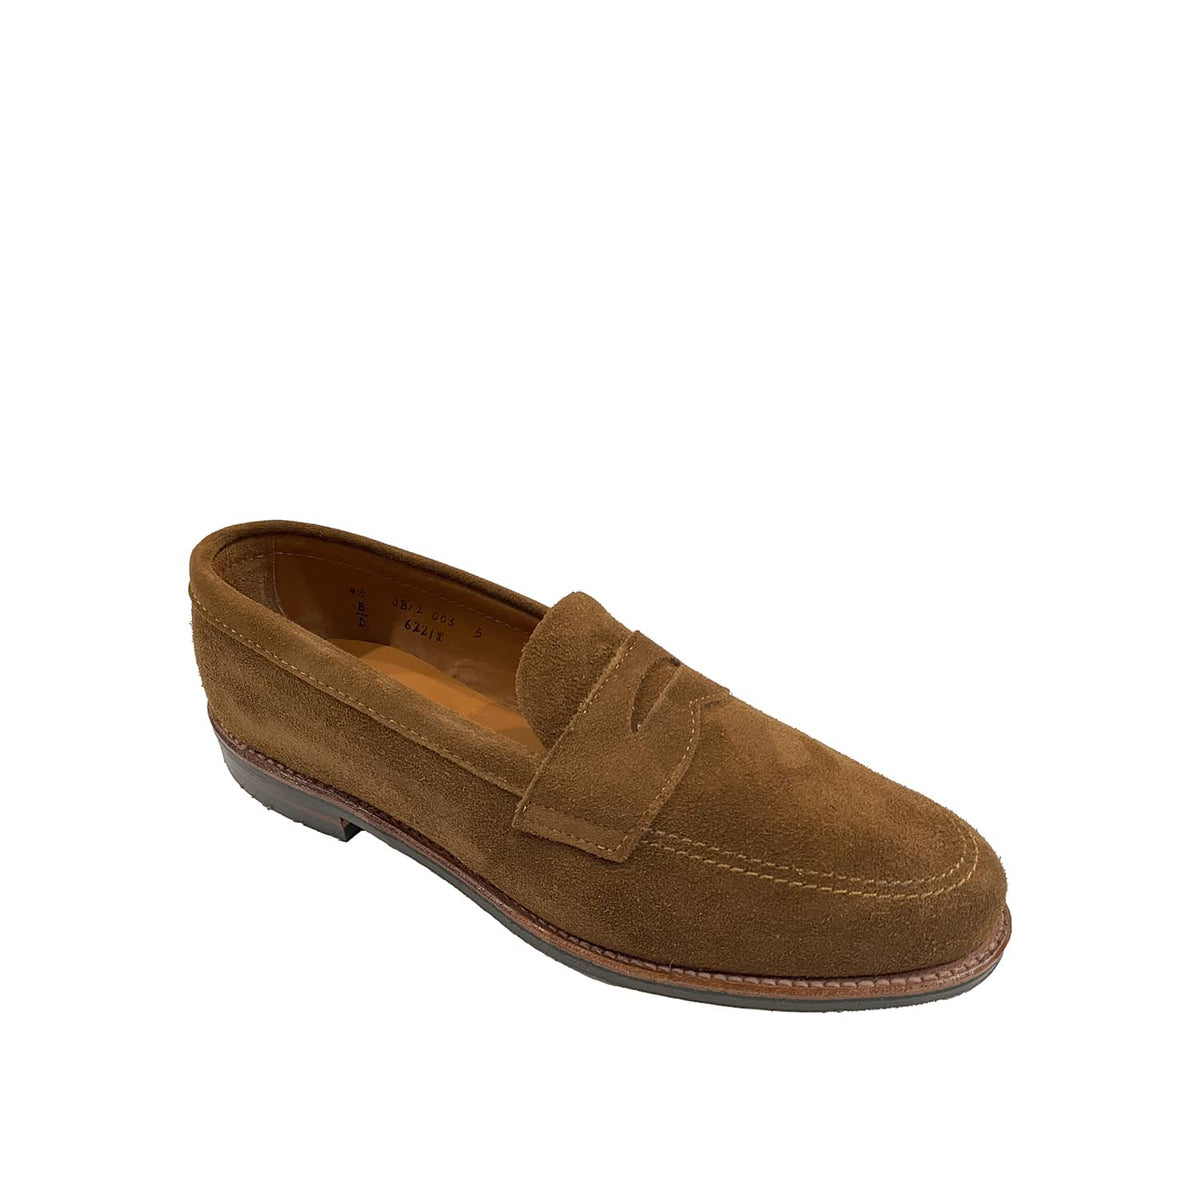 Alden 6221L Unlined Penny Loafer Snuff Suede